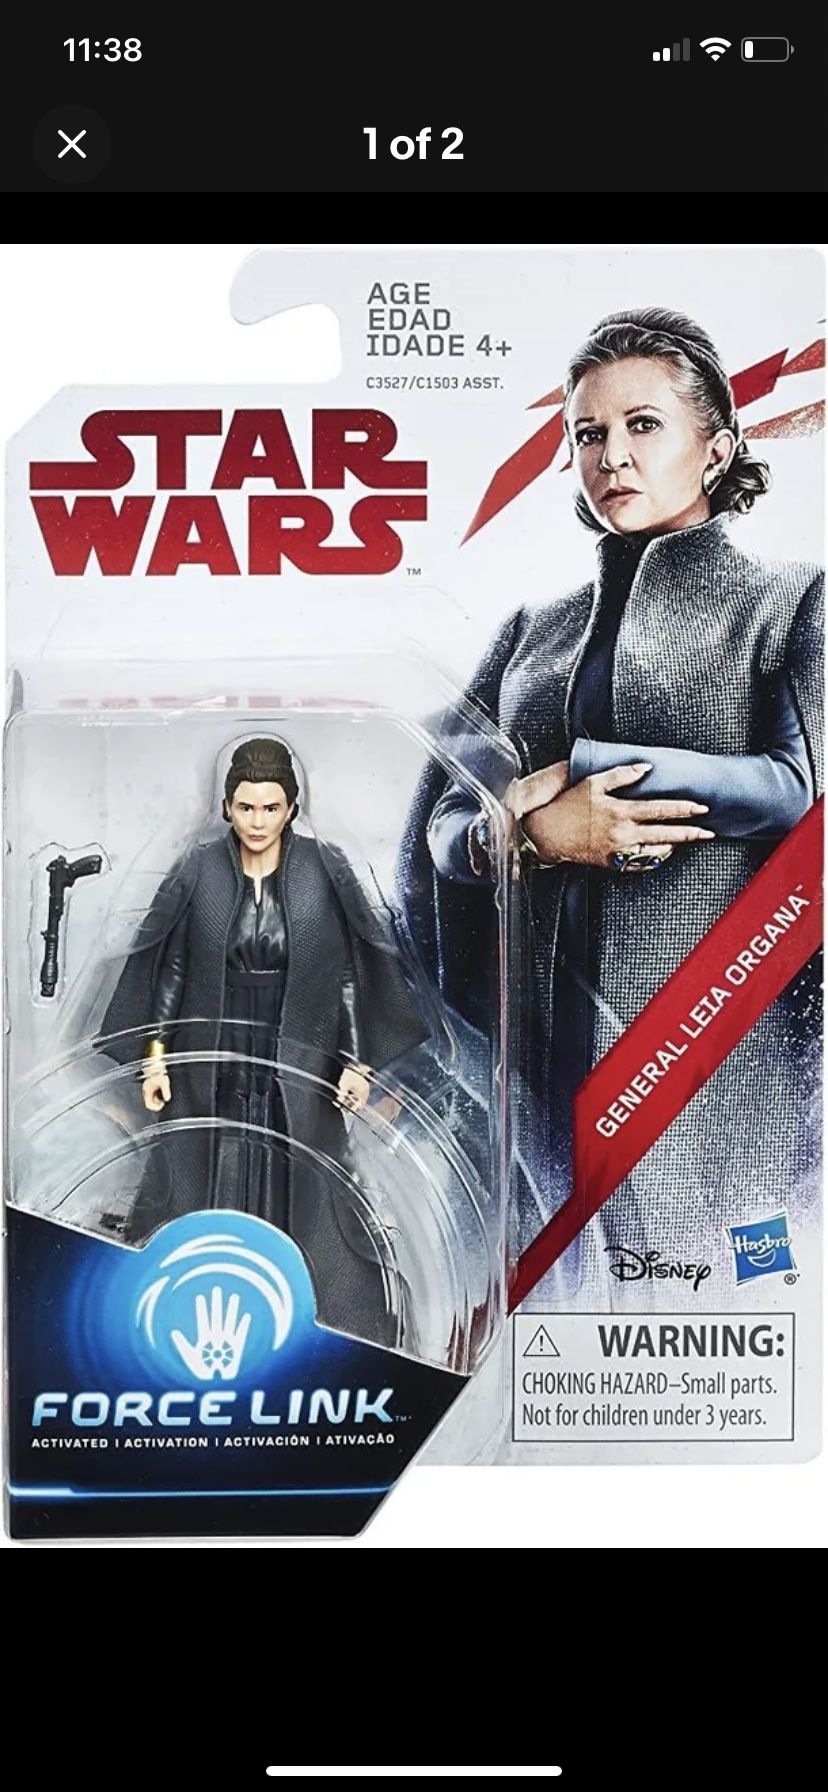 NEW STAR WARS General Leia Organa The Last Jedi 3.75" Force Link ACTION FIGURE!